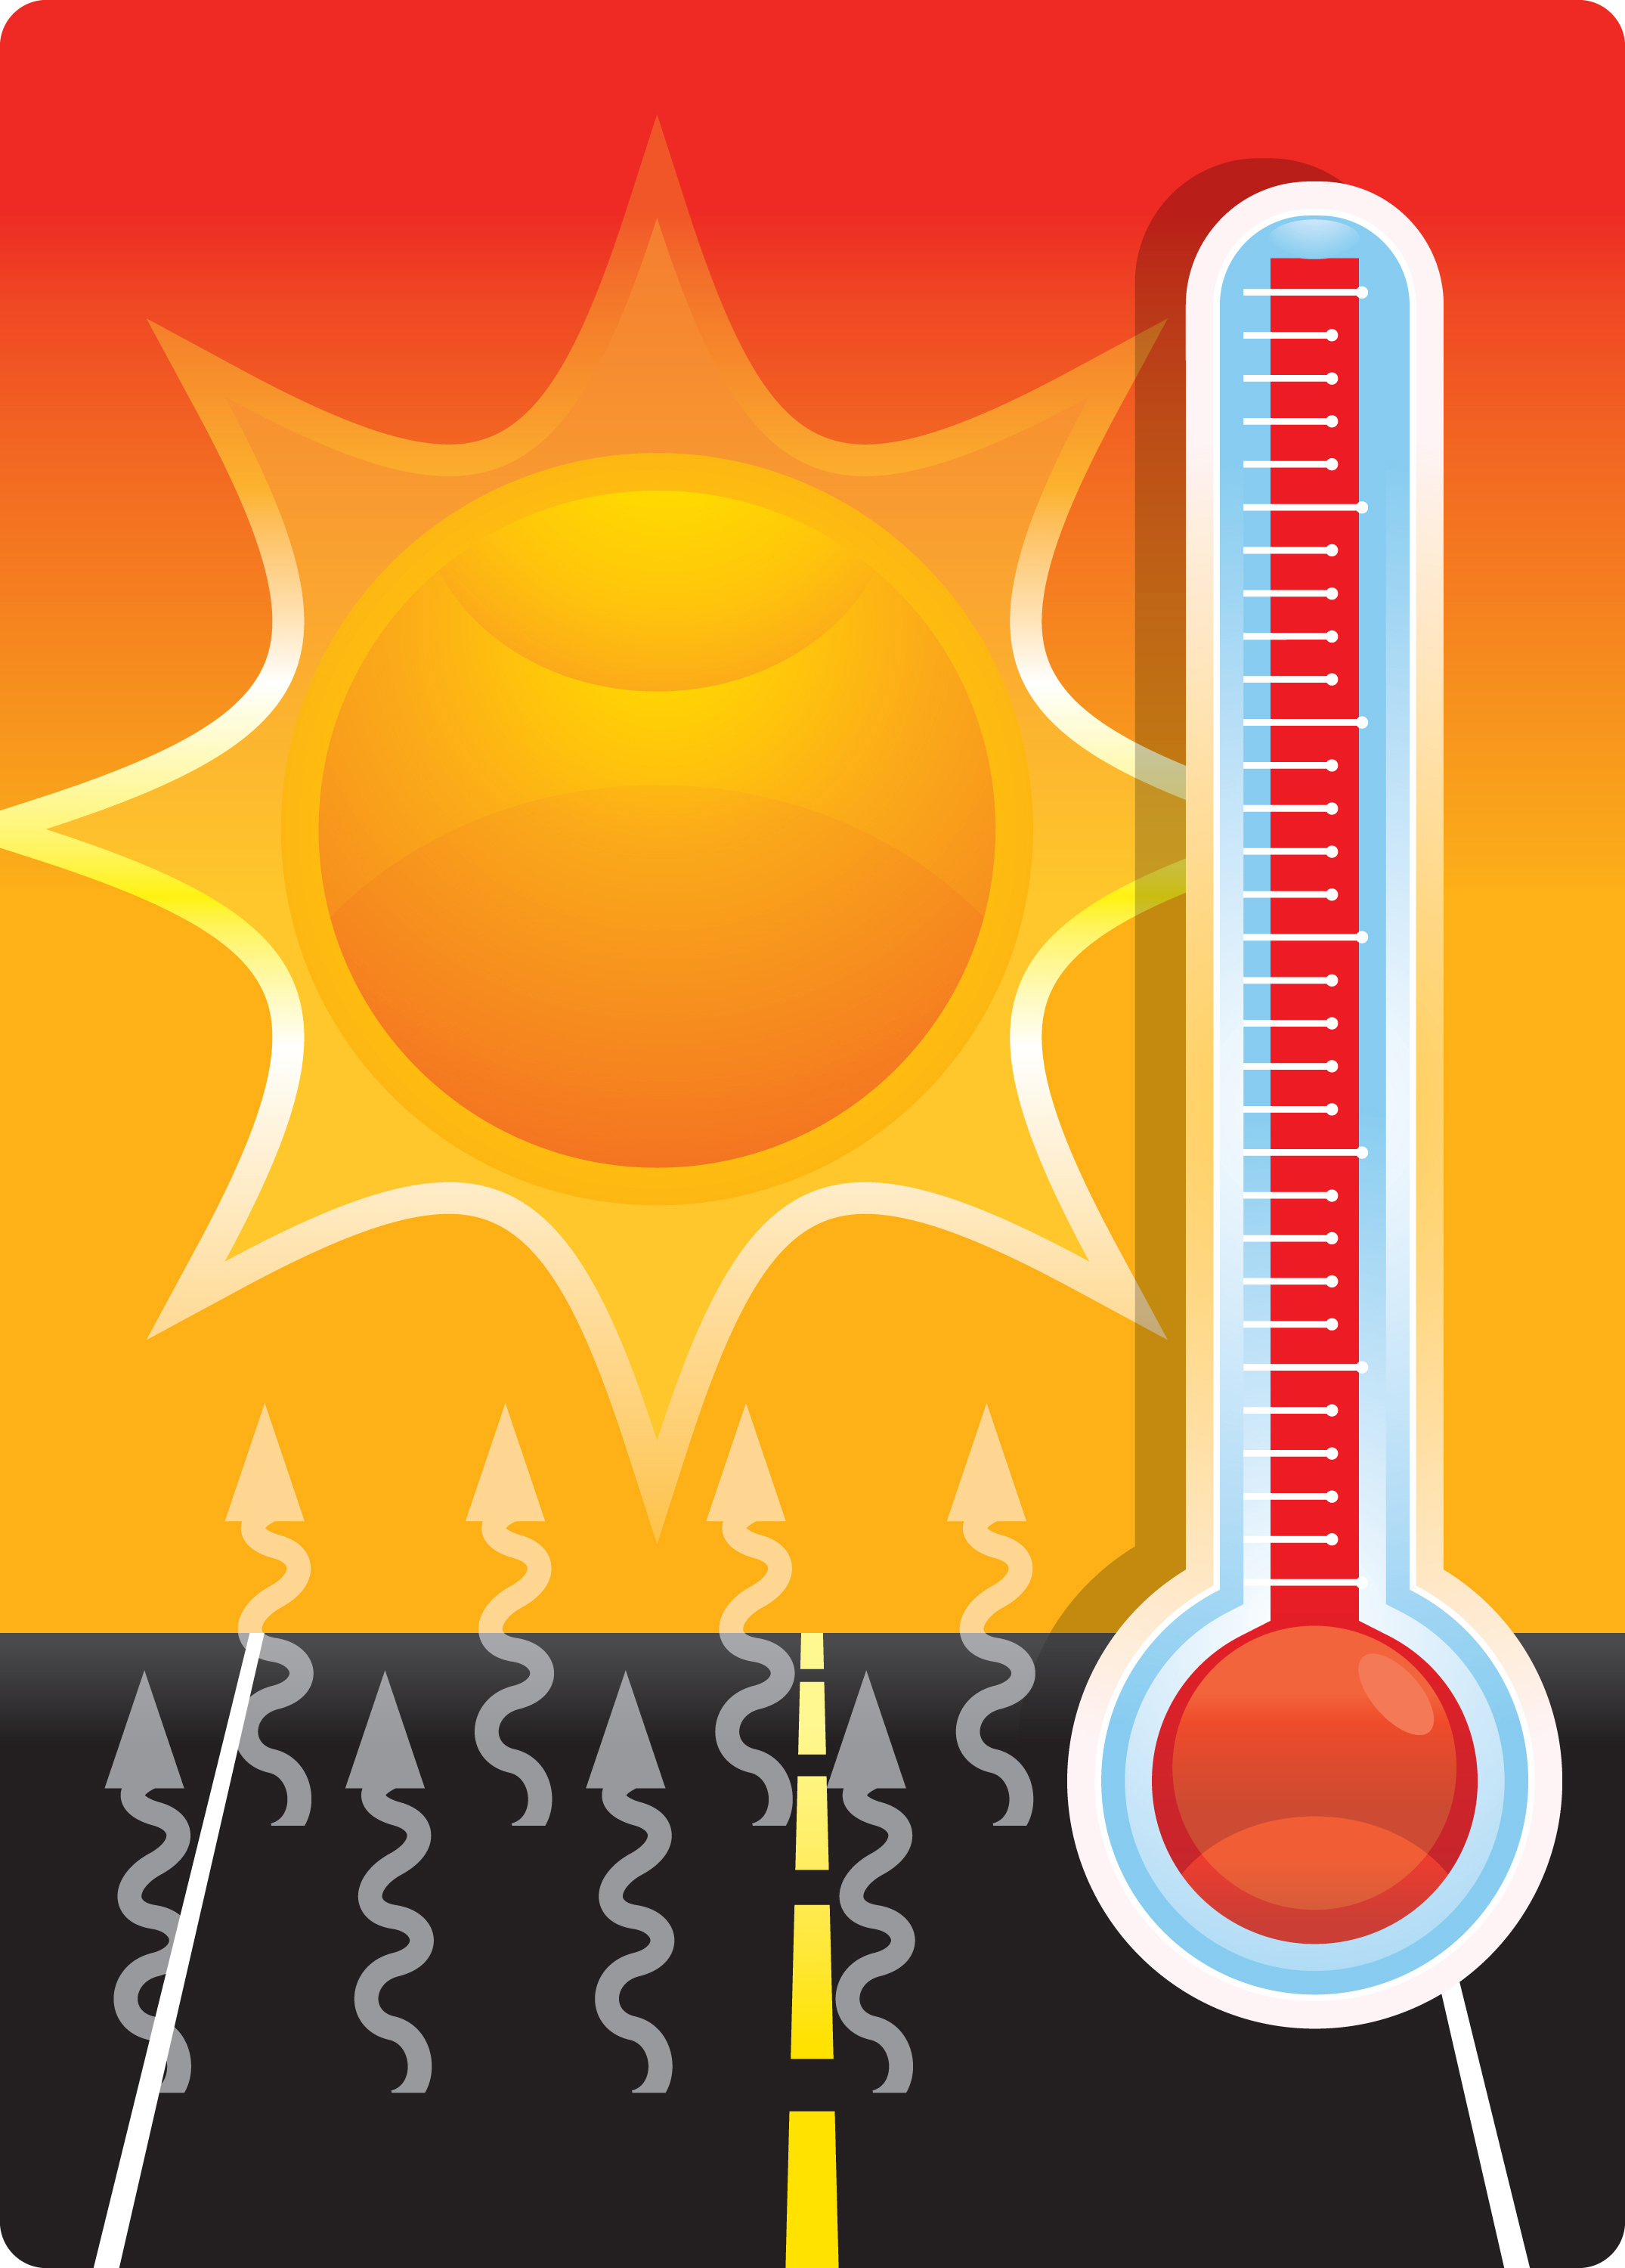 Keep Your Cool This Summer with Entergy’s Hot Weather Tips.